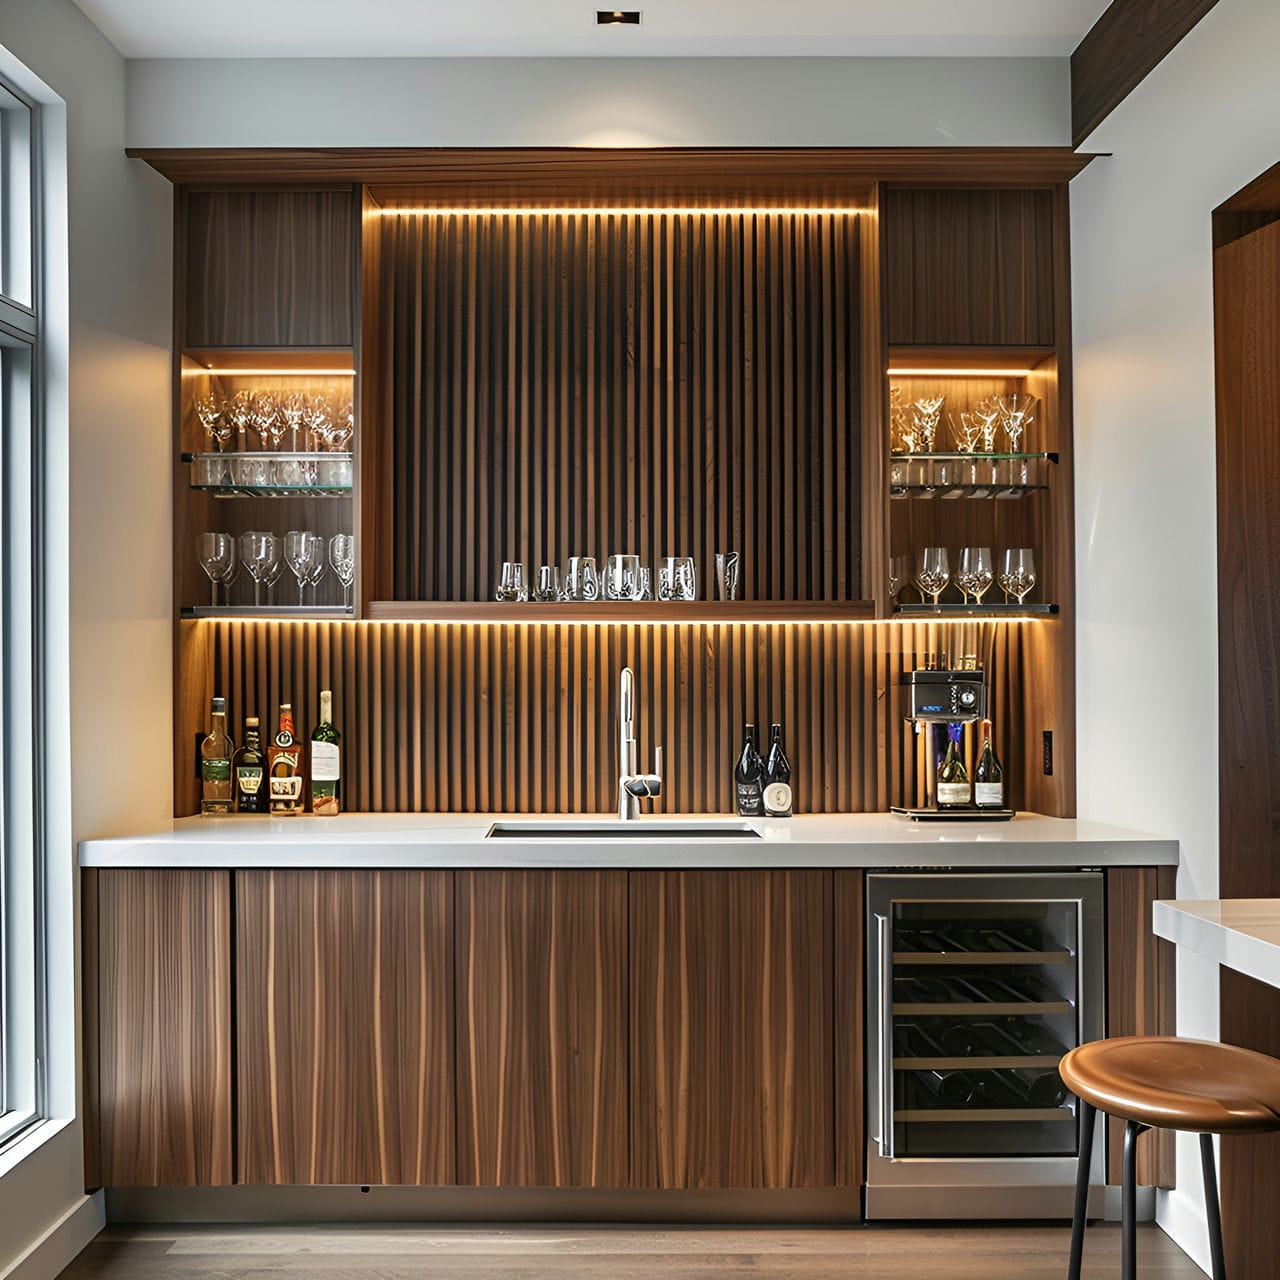 Wet bar: size, functionality, uses, furniture and renovation